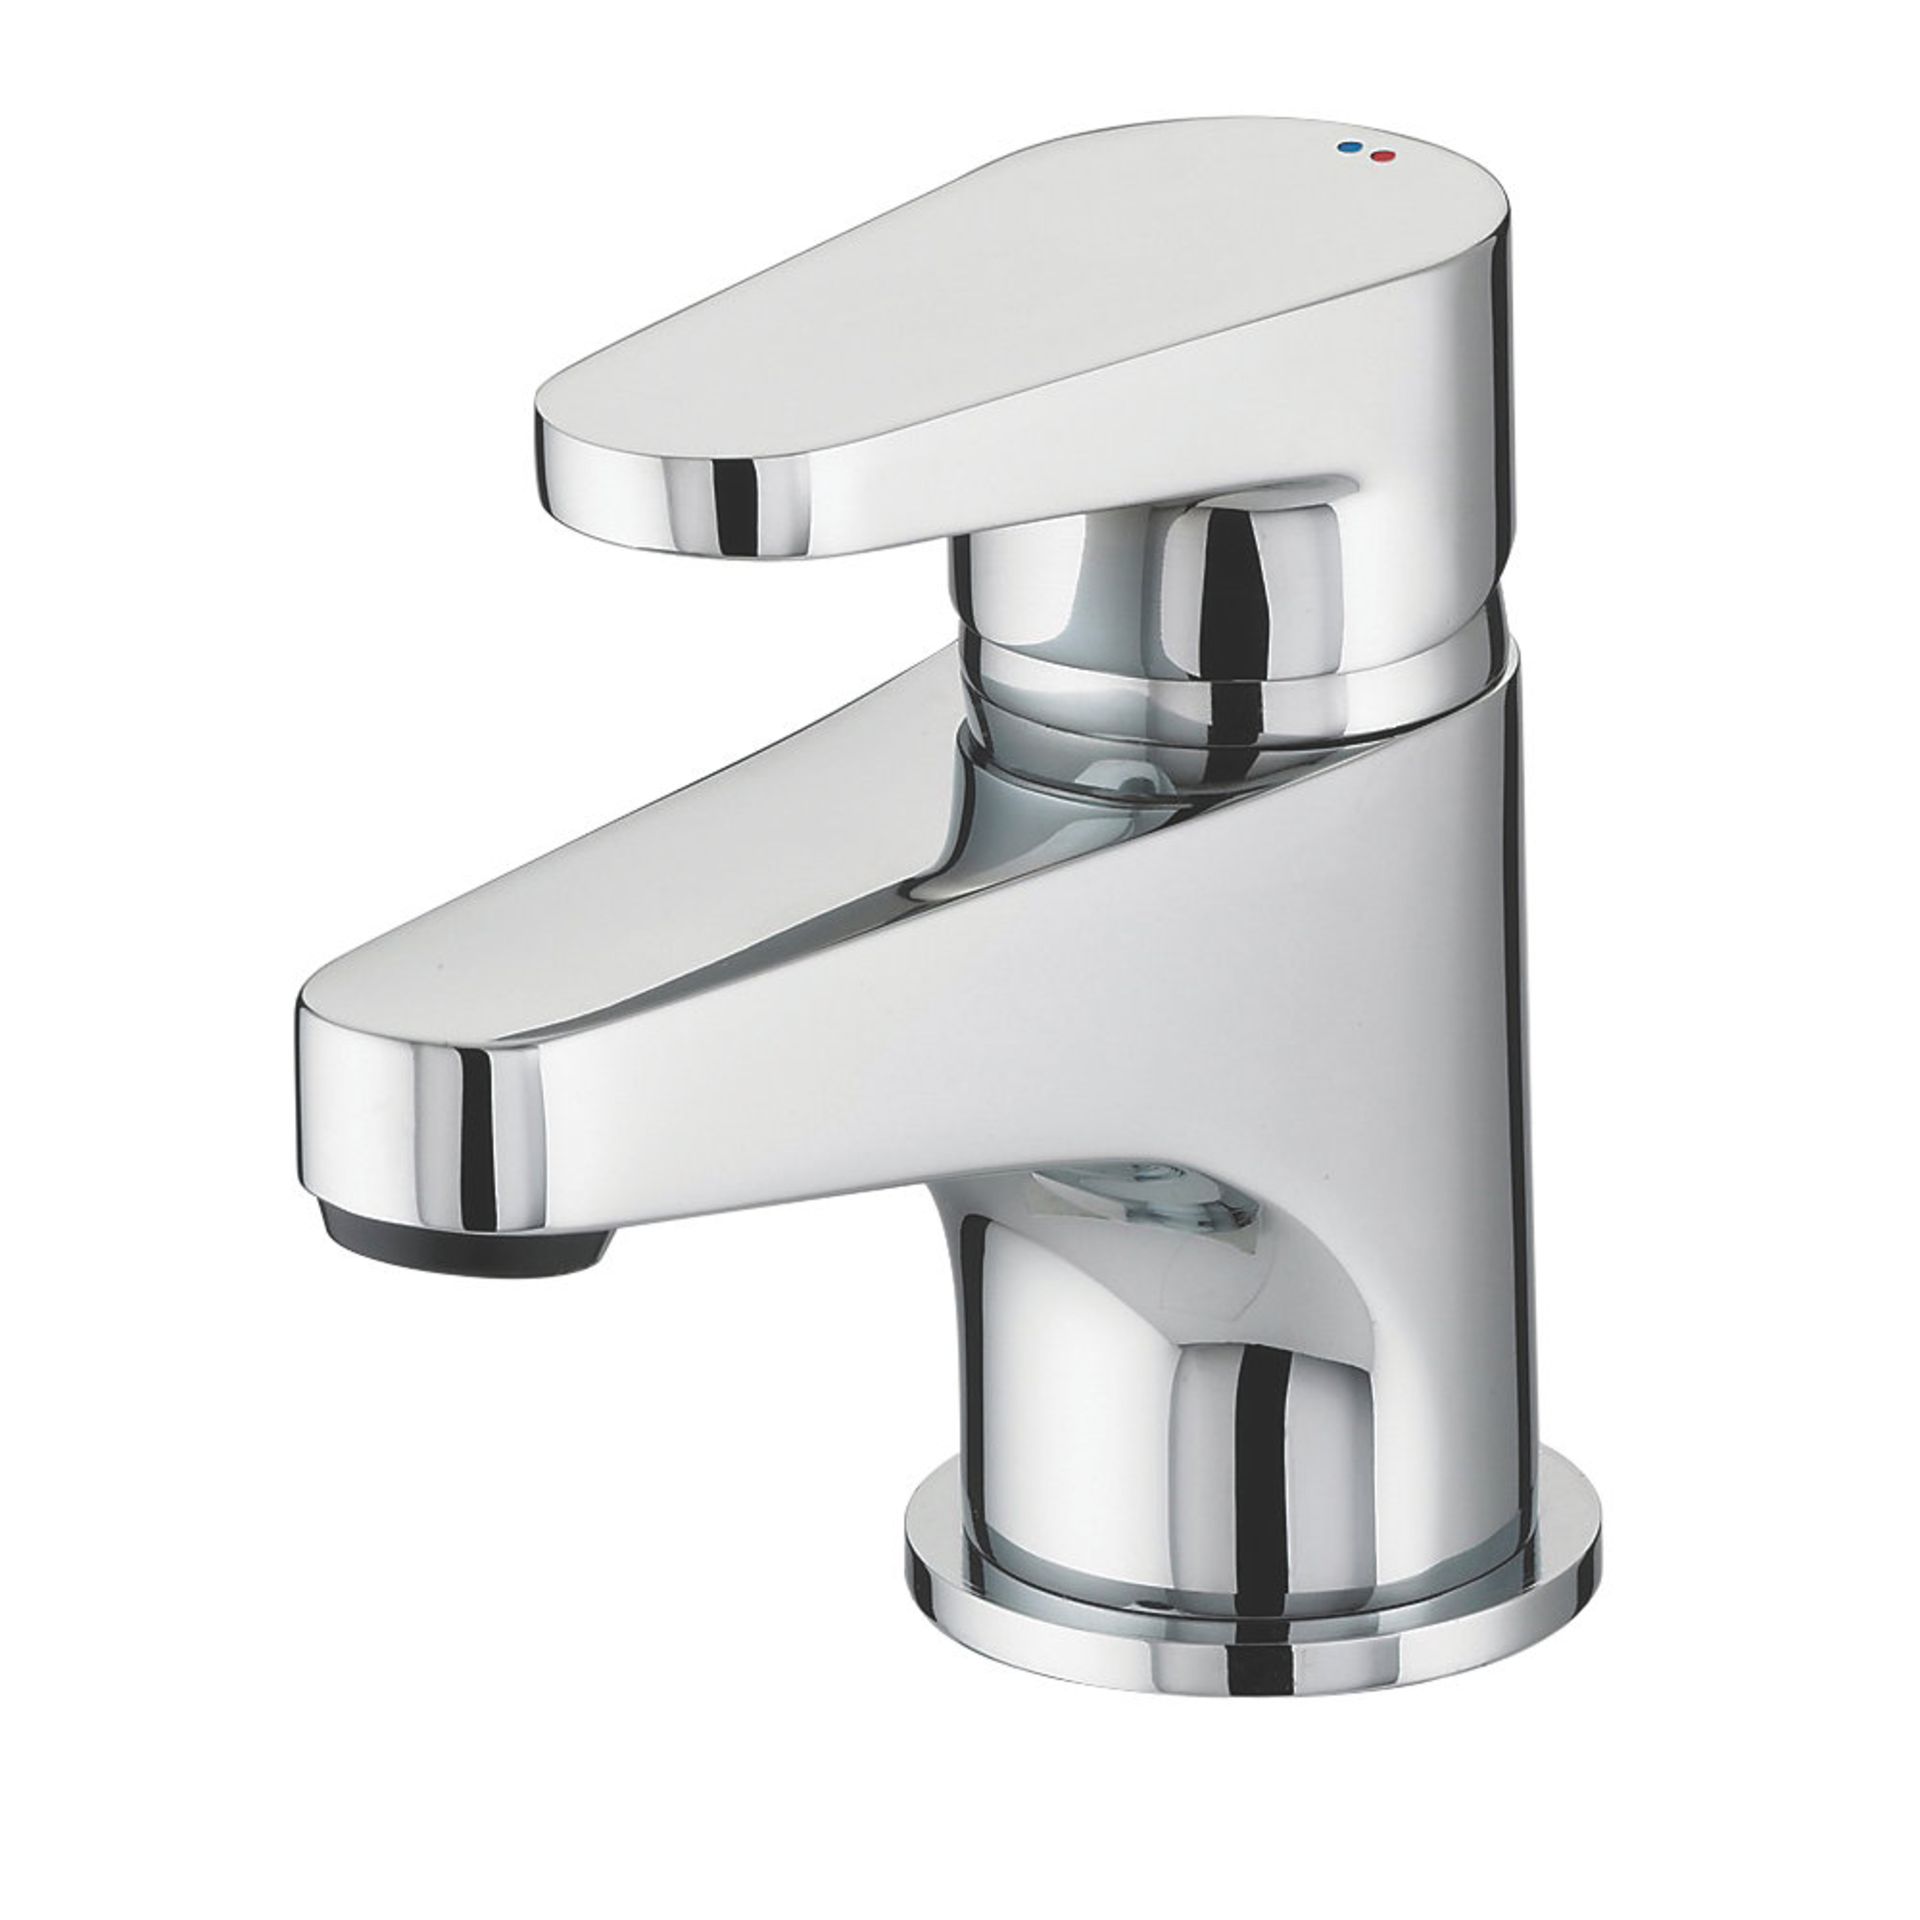 (PP192) Bristan Quest Bathroom Basin Mono Mixer Tap with Click Waste. Chrome-plated brass. - Image 3 of 4